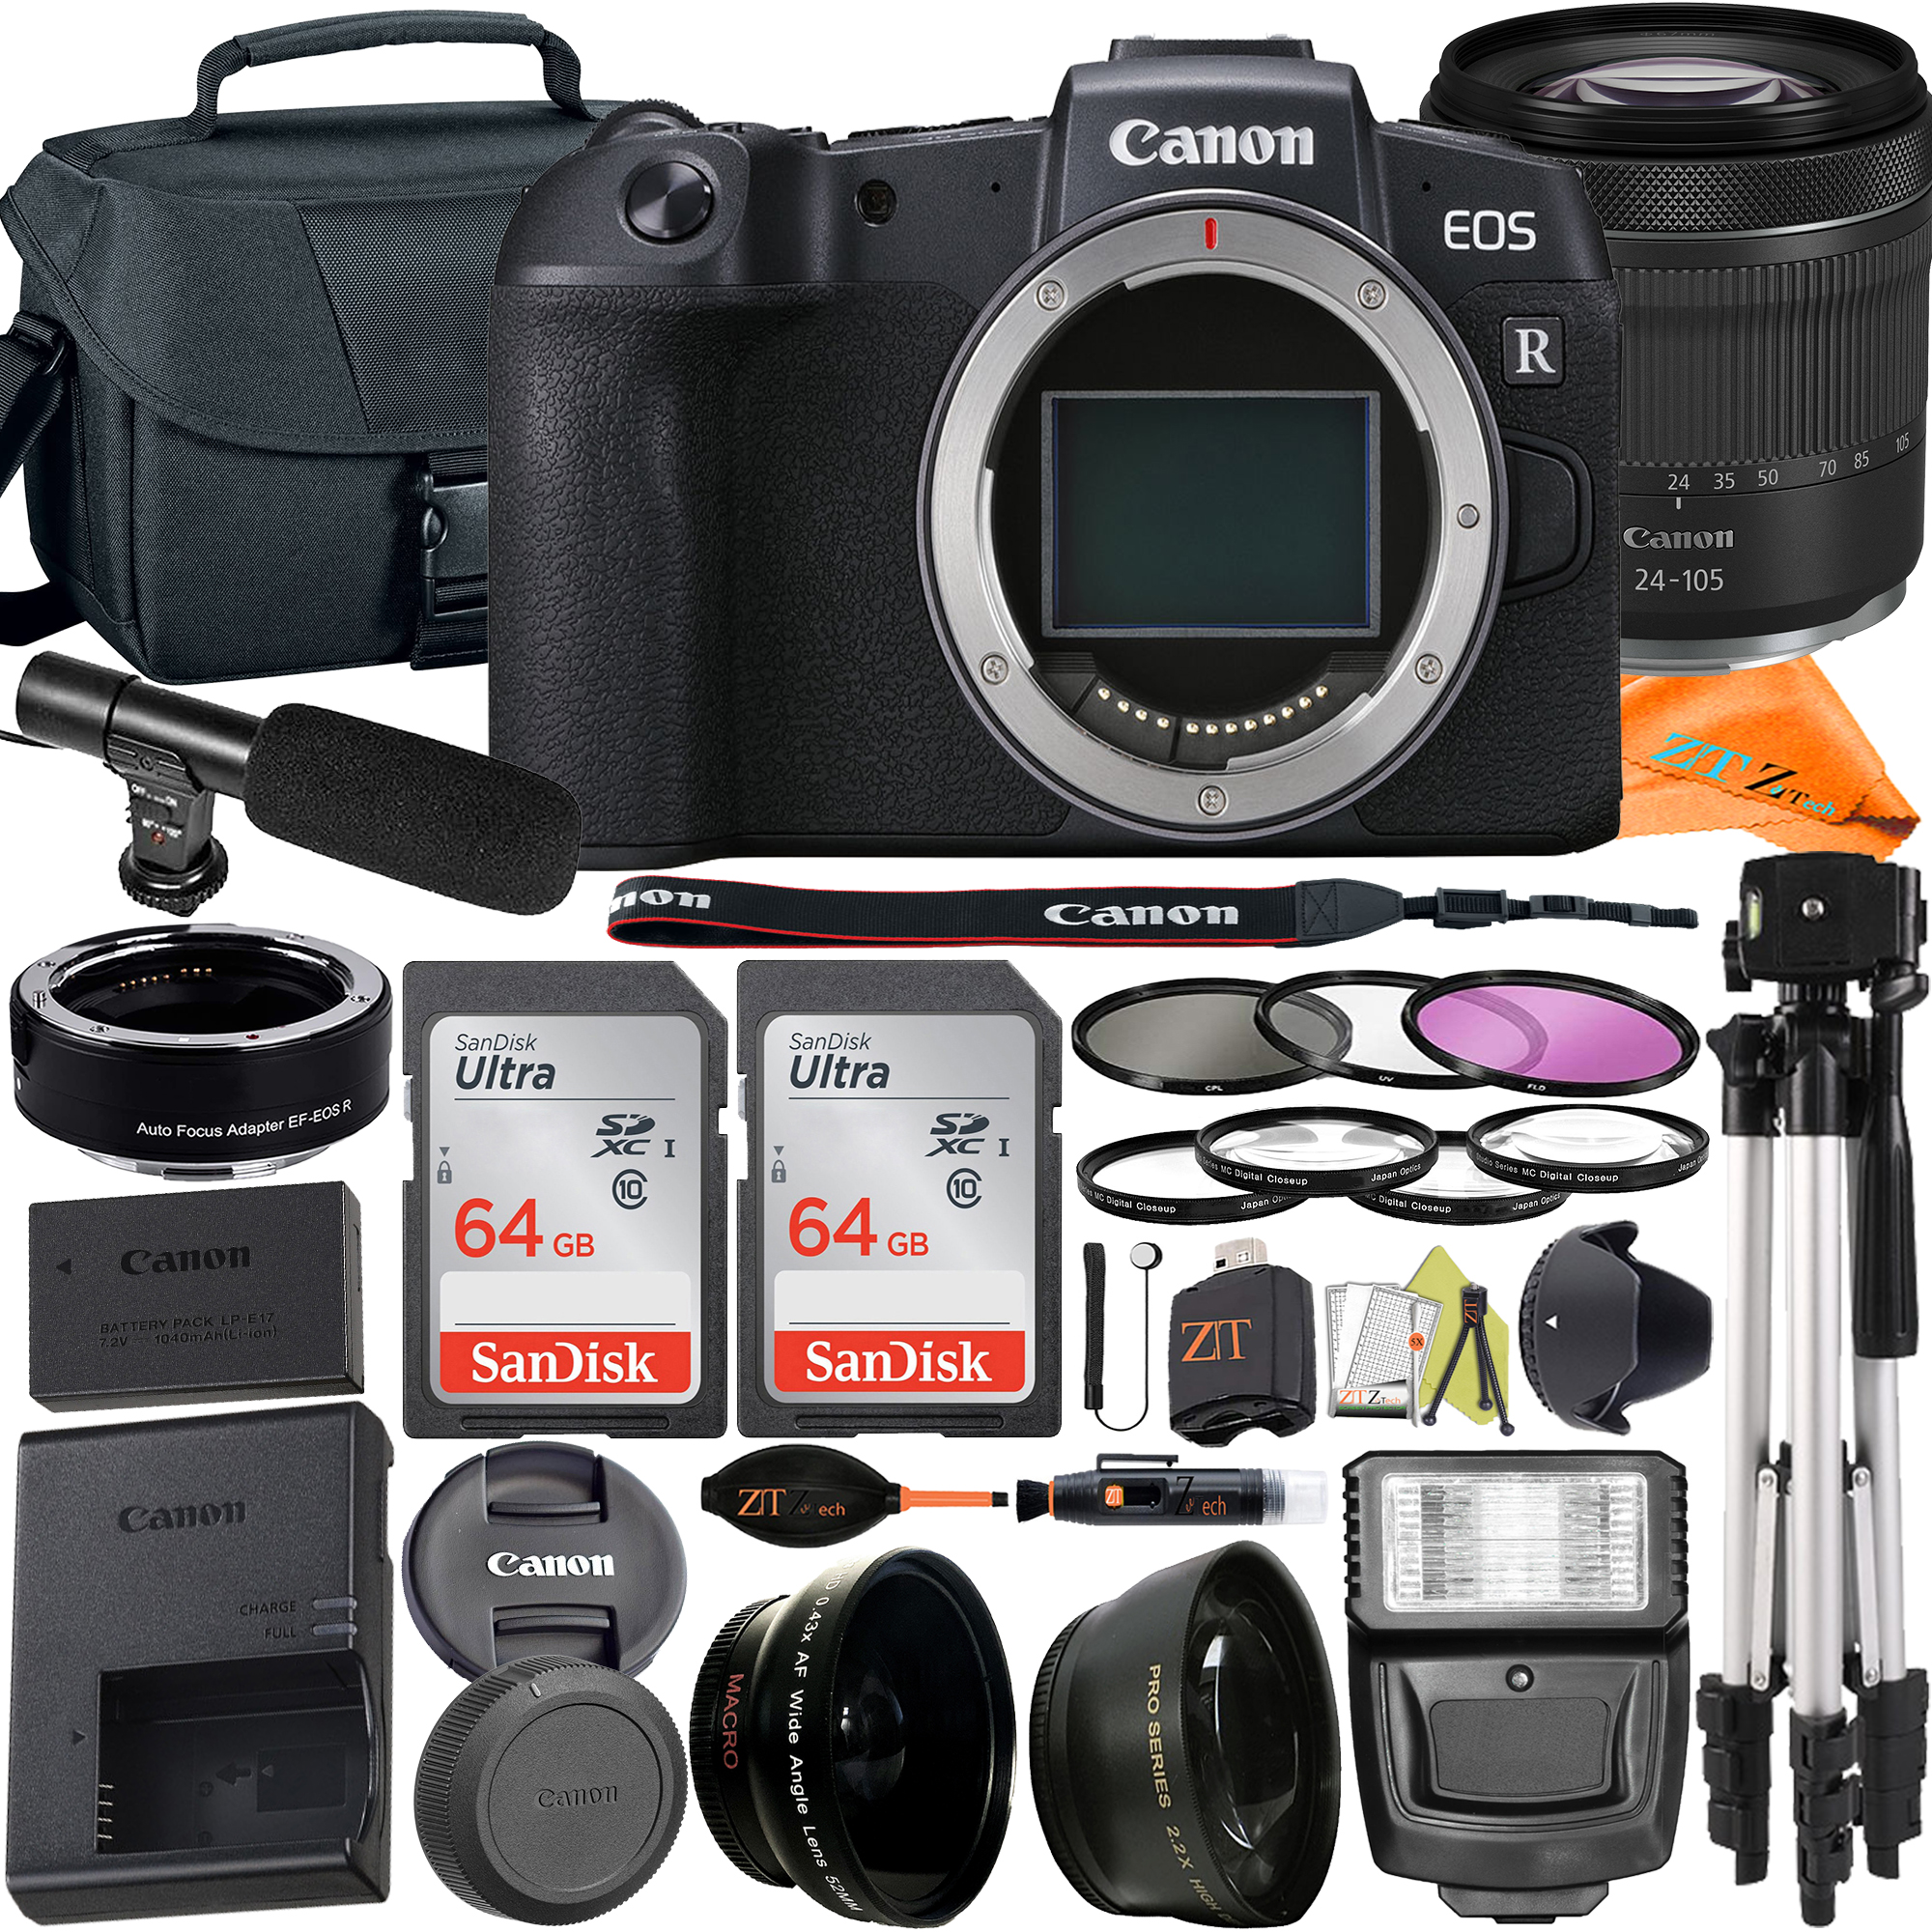 Canon EOS RP Mirrorless Camera with RF24-105mm Lens + Mount Adapter + 2Pack SanDisk 64GB + Case + ZeeTech Accessory